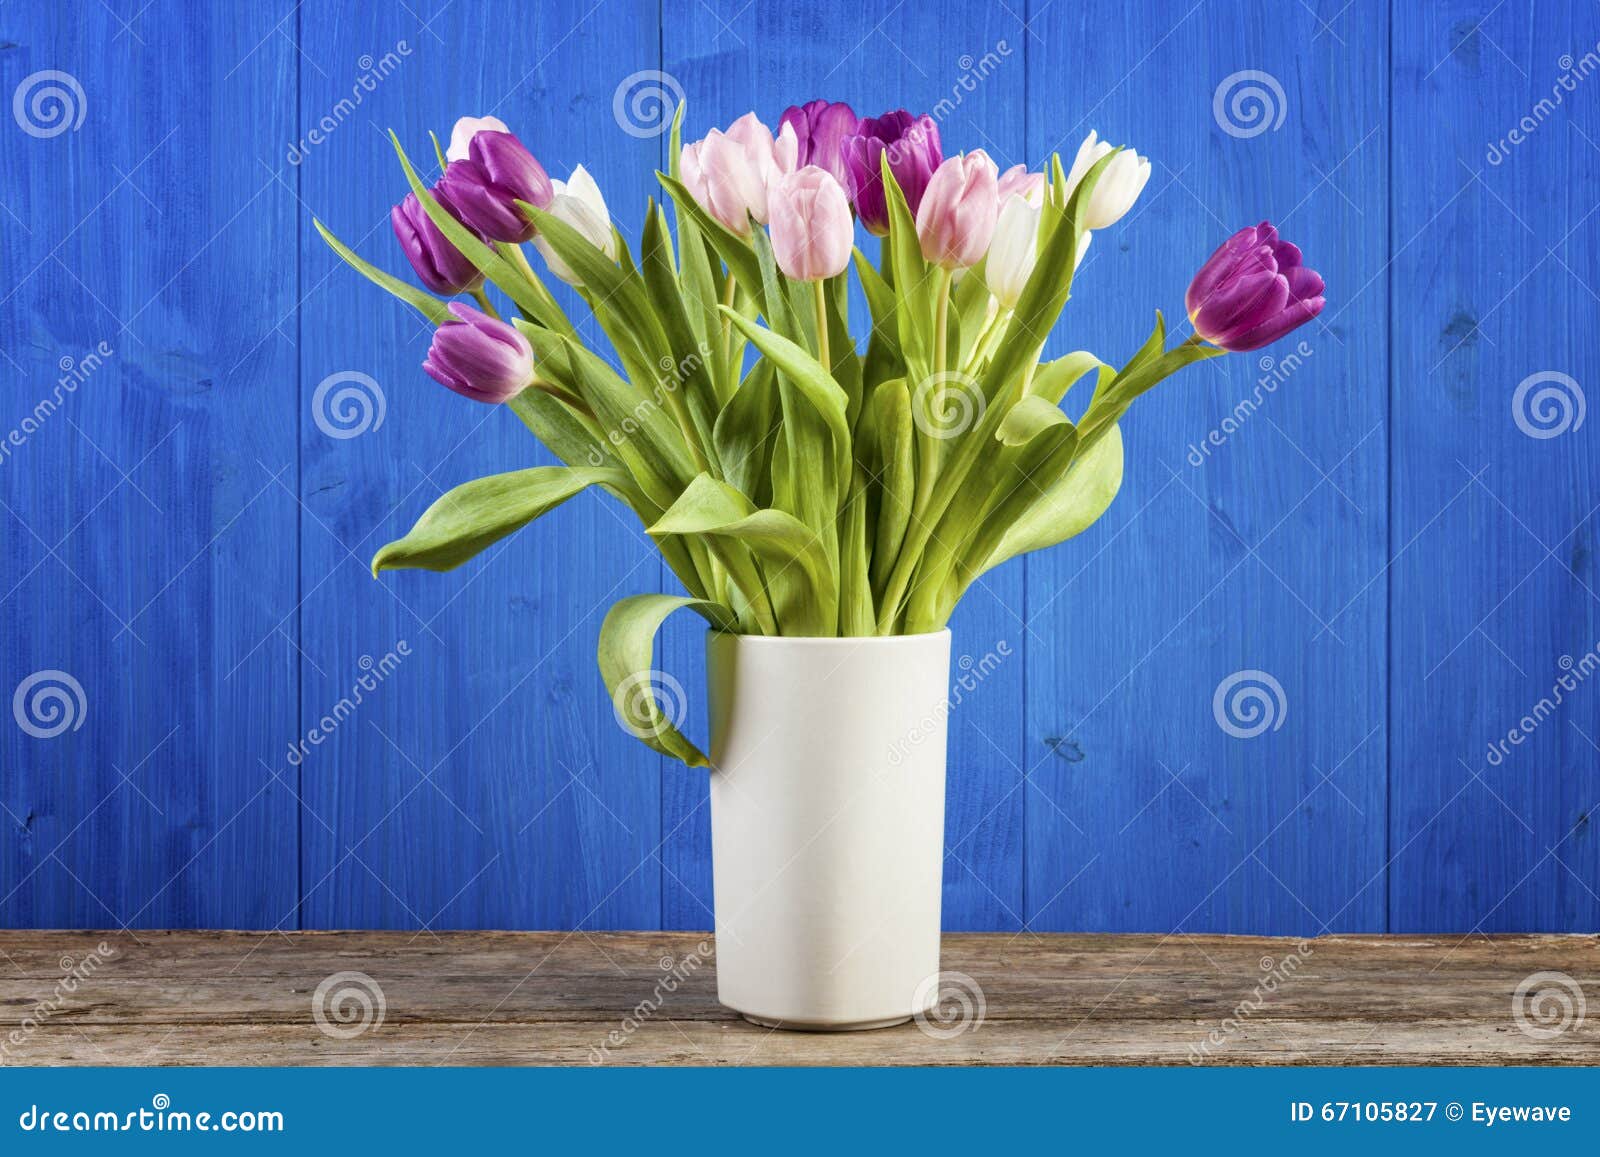 Tulips in a Vase with Blue Wooden Background Stock Image - Image of ...